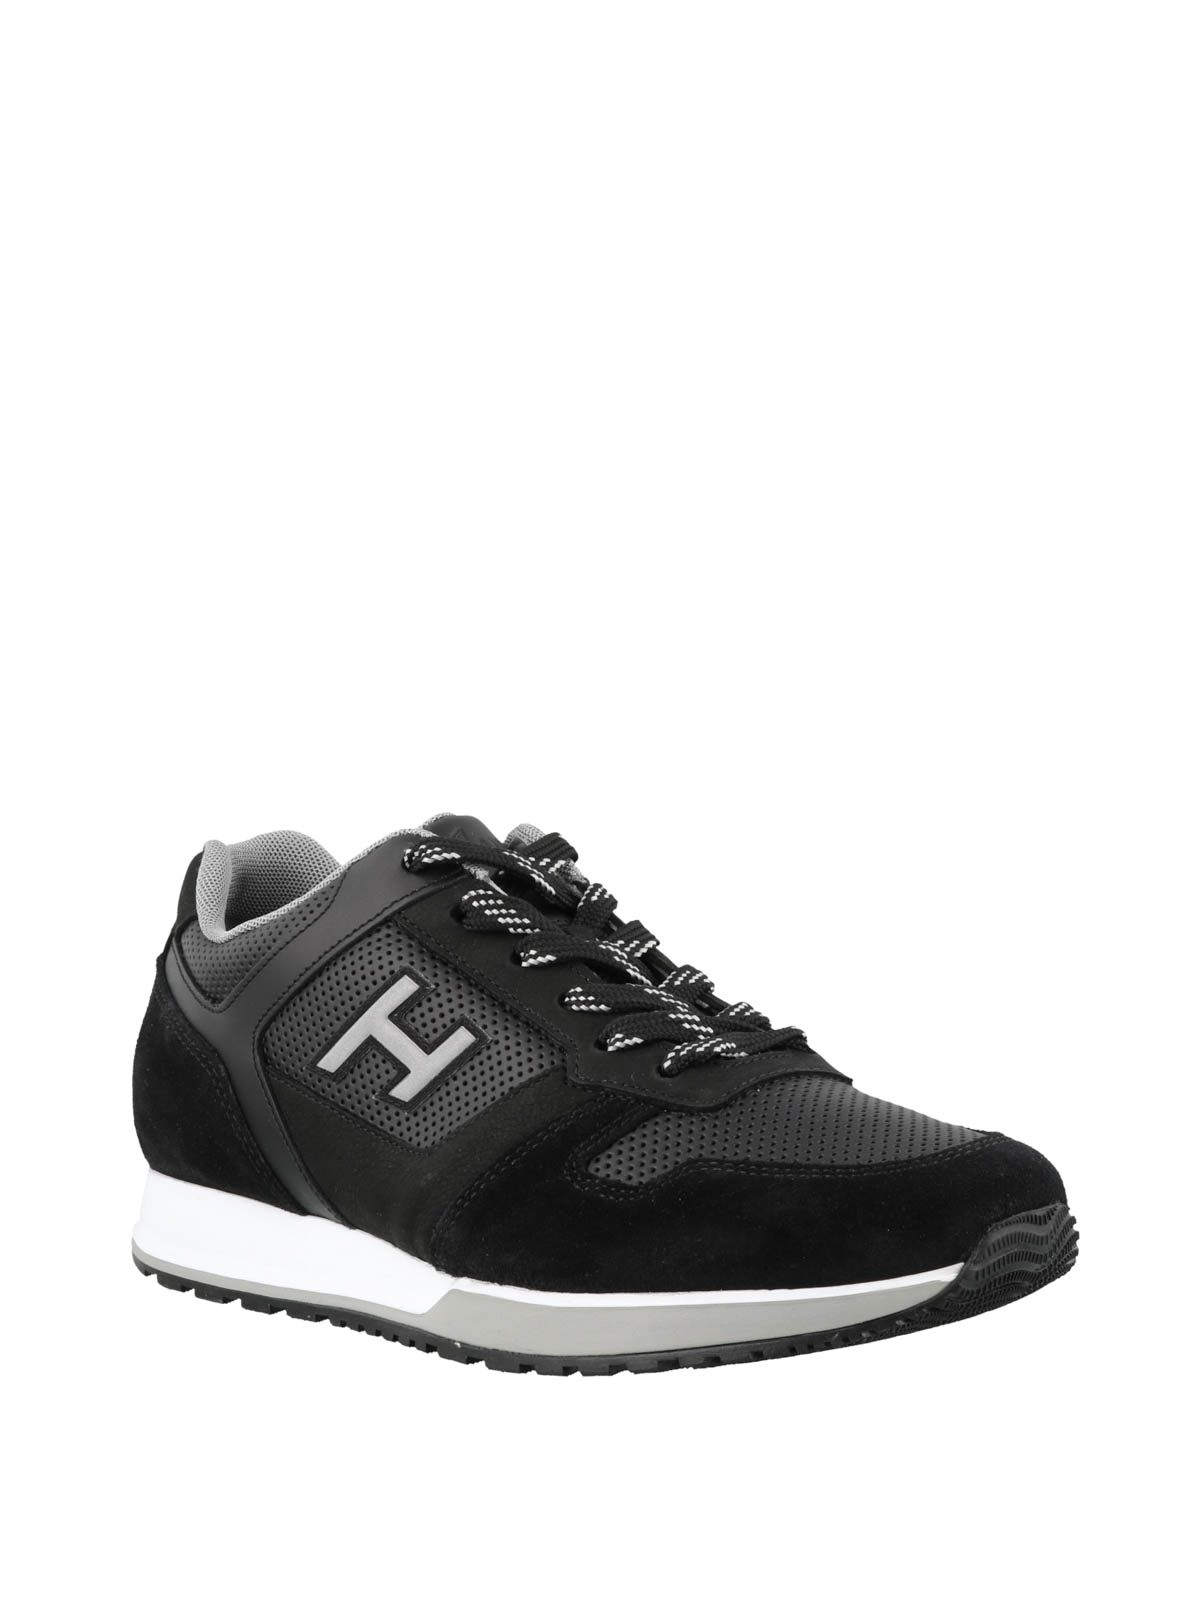 Trainers Hogan - H321 black nubuck and leather sneakers ...